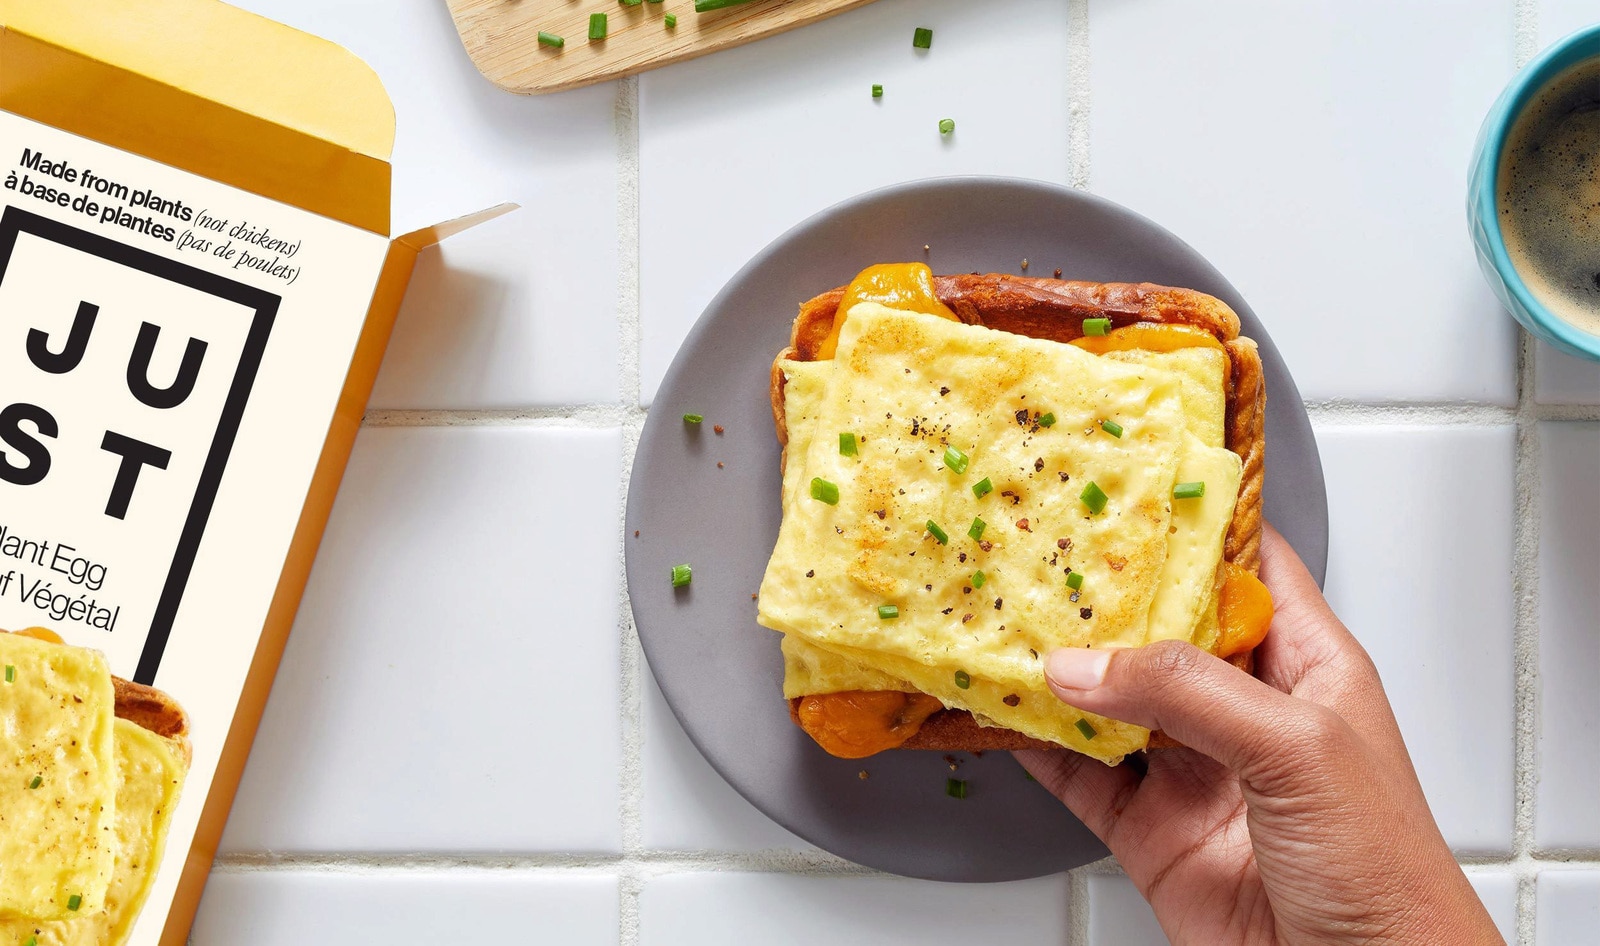 Vegan JUST Egg Launches at Walmart in Canada